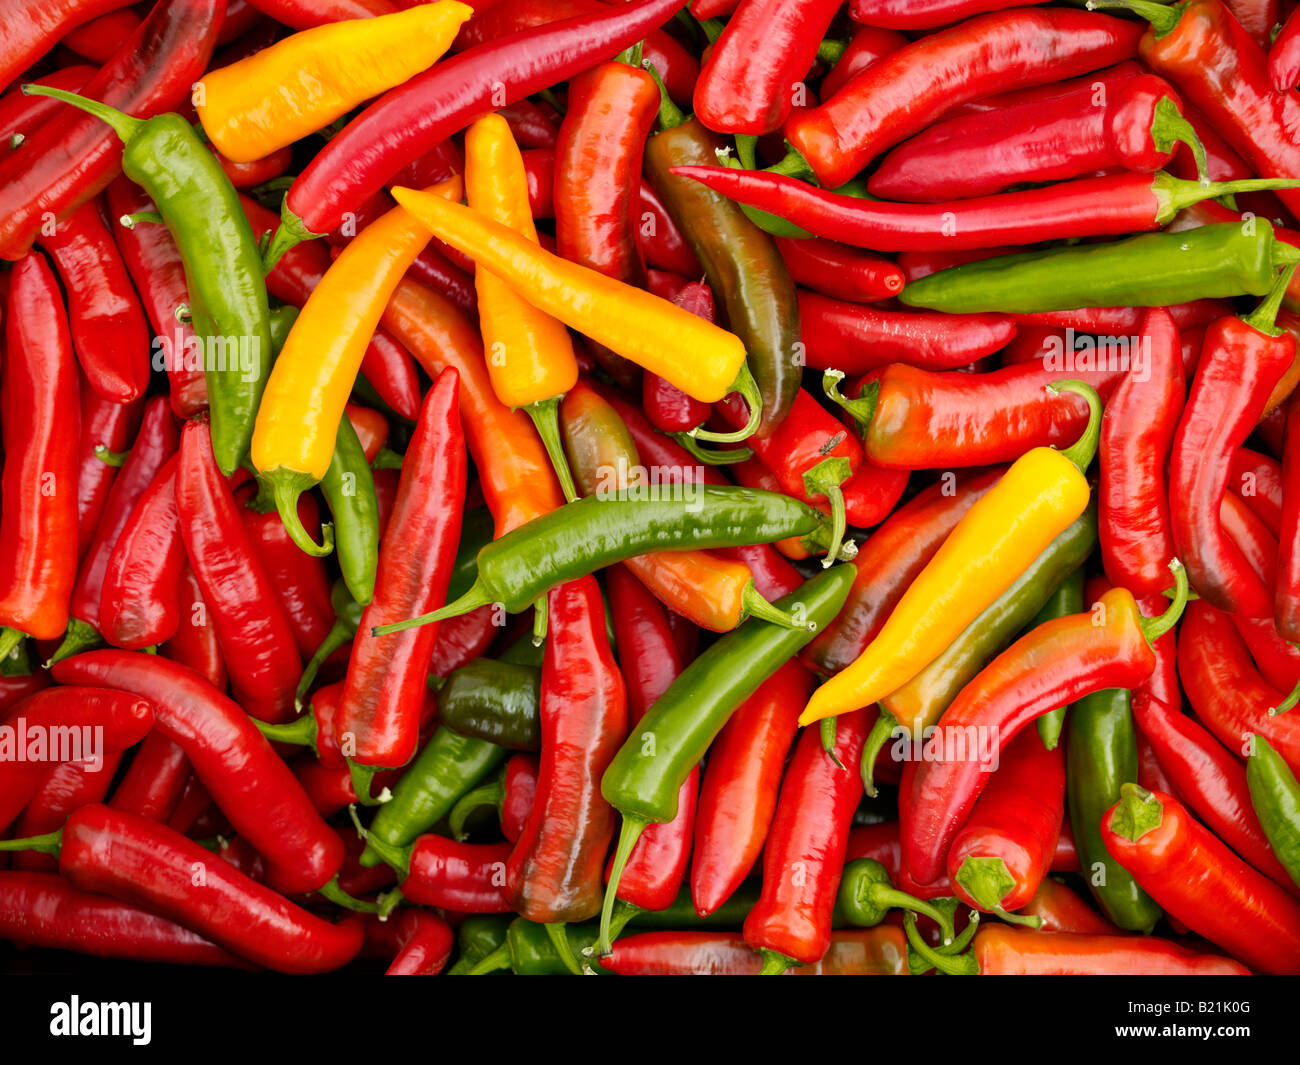 A tray of chillis at various stages of ripening Stock Photo